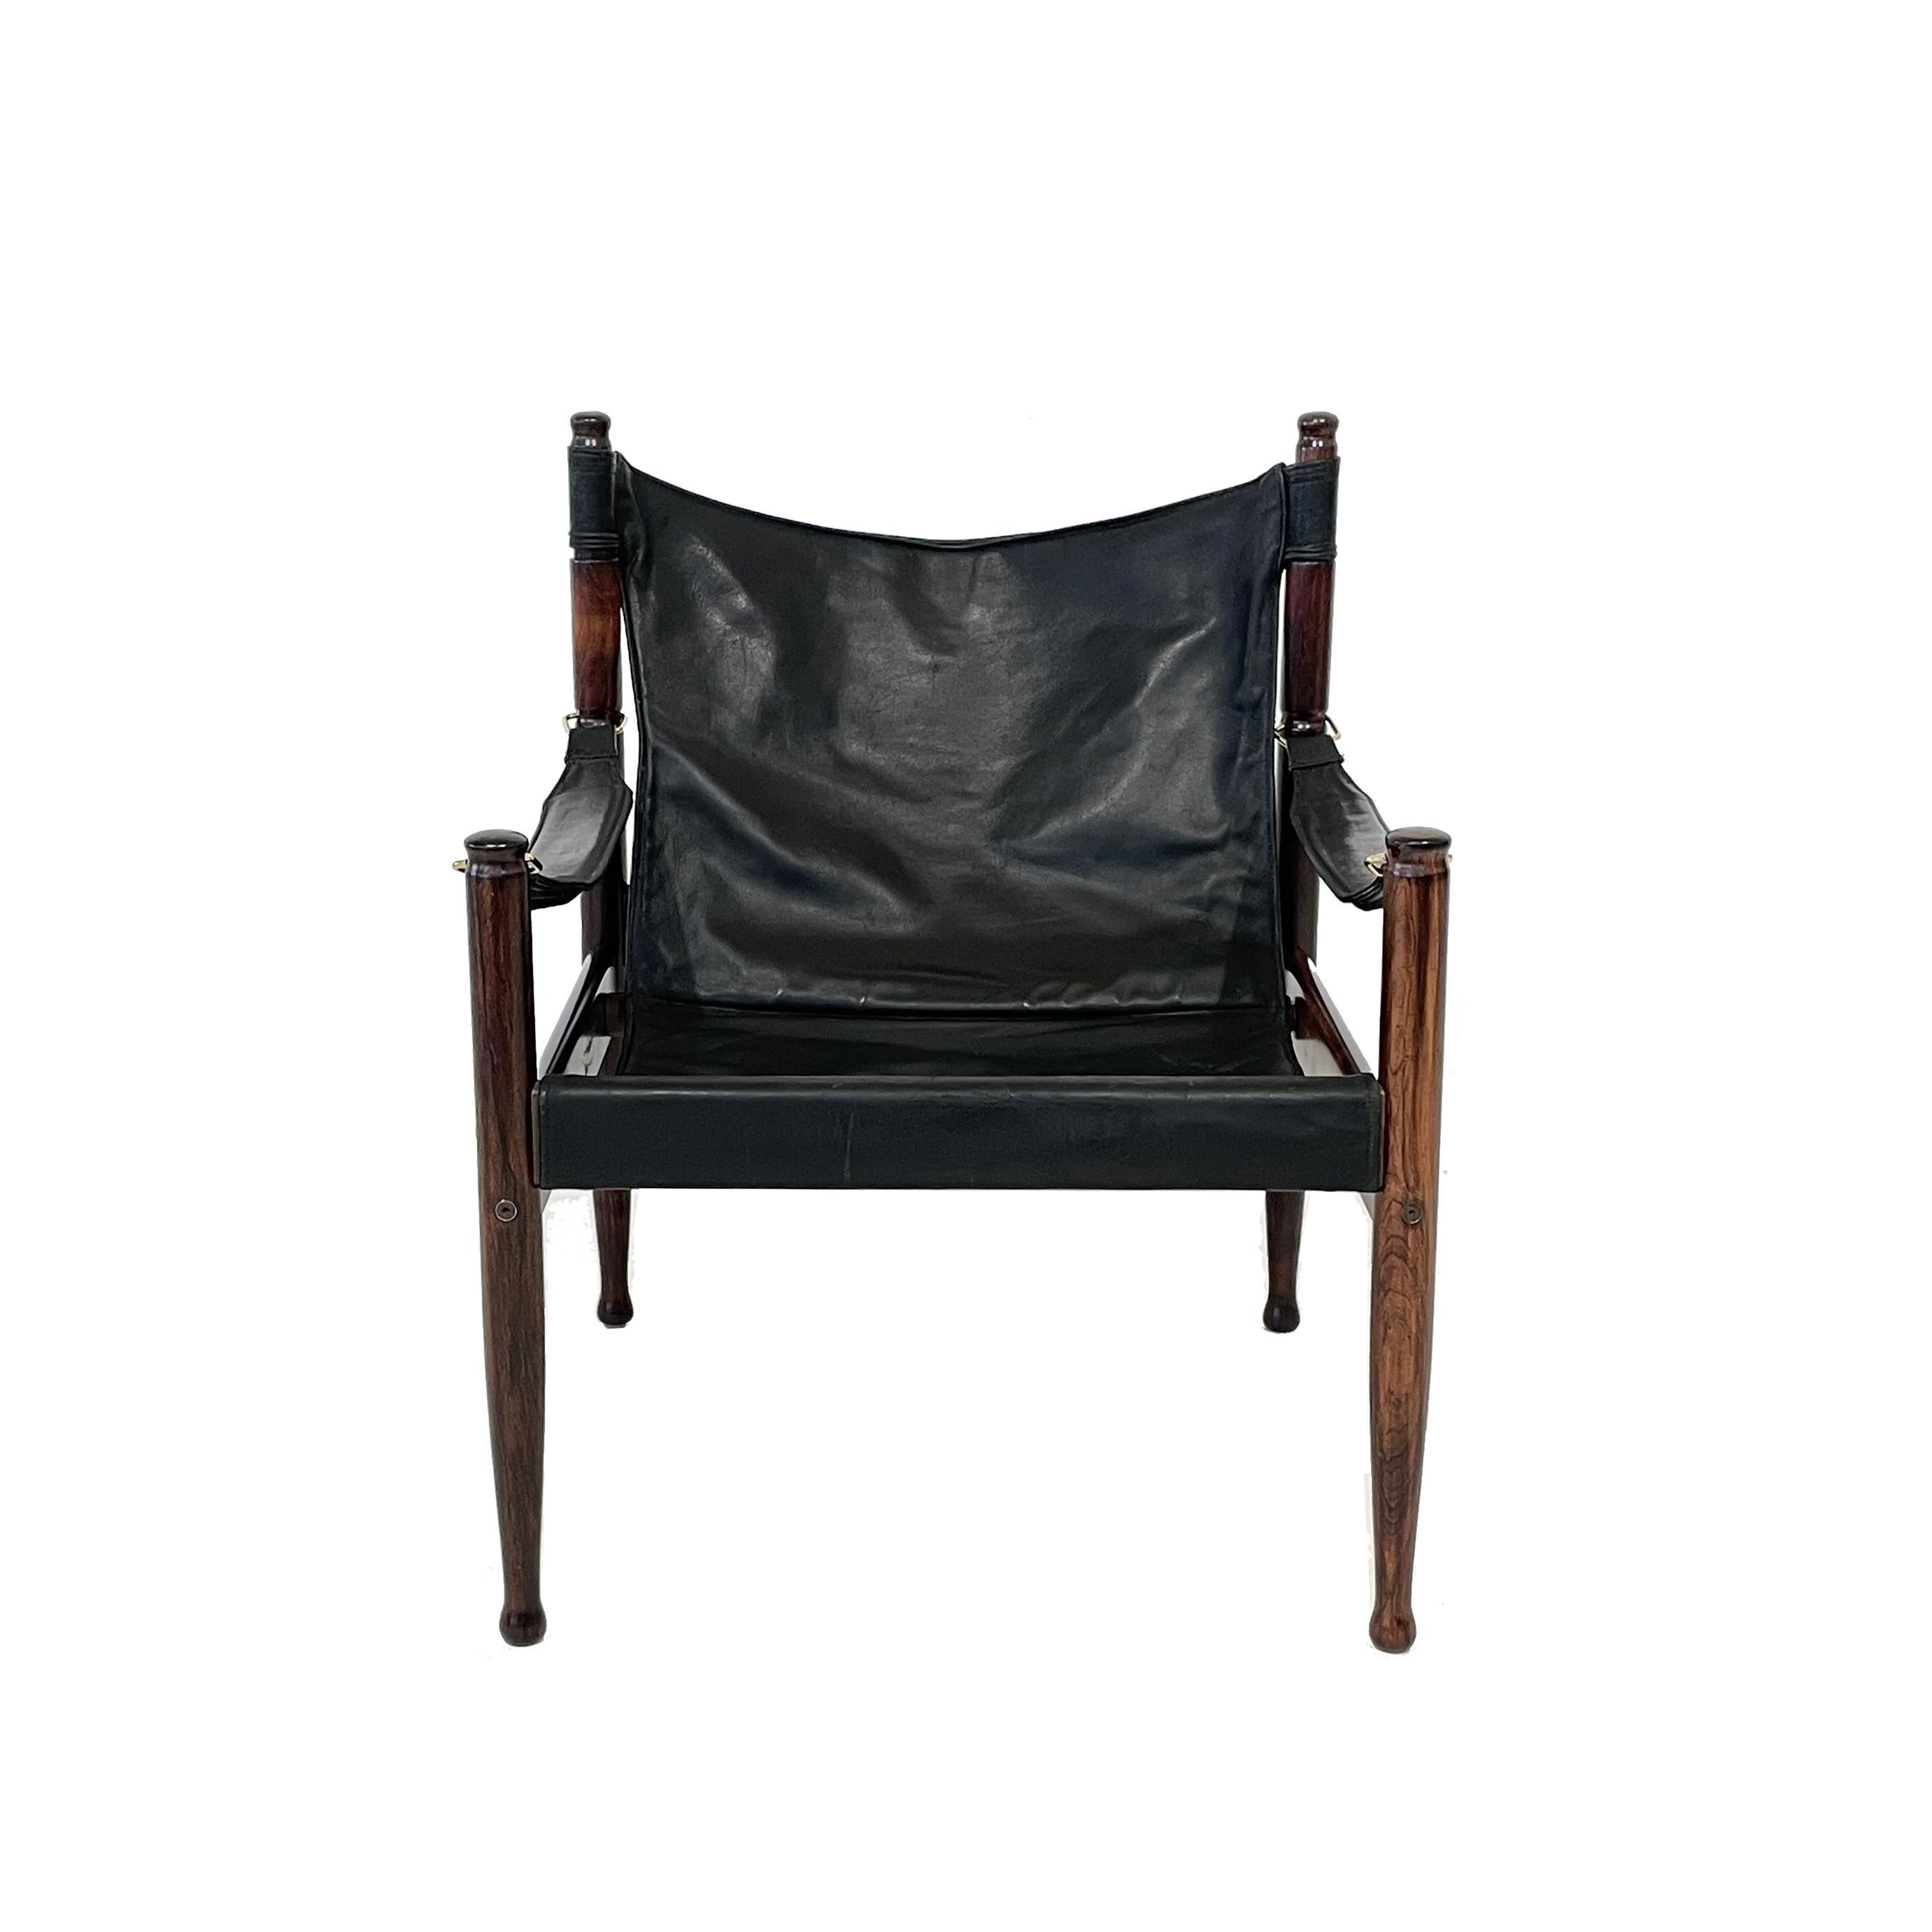 Safari lounge chair designed by Erik Worts for Niels Eilersen, Denmark, 1960. Made of solid rosewood and leather seat with brass details. Very nice patinated leather seat but still in good vintage condition. 

Stamped below

The chair is in good